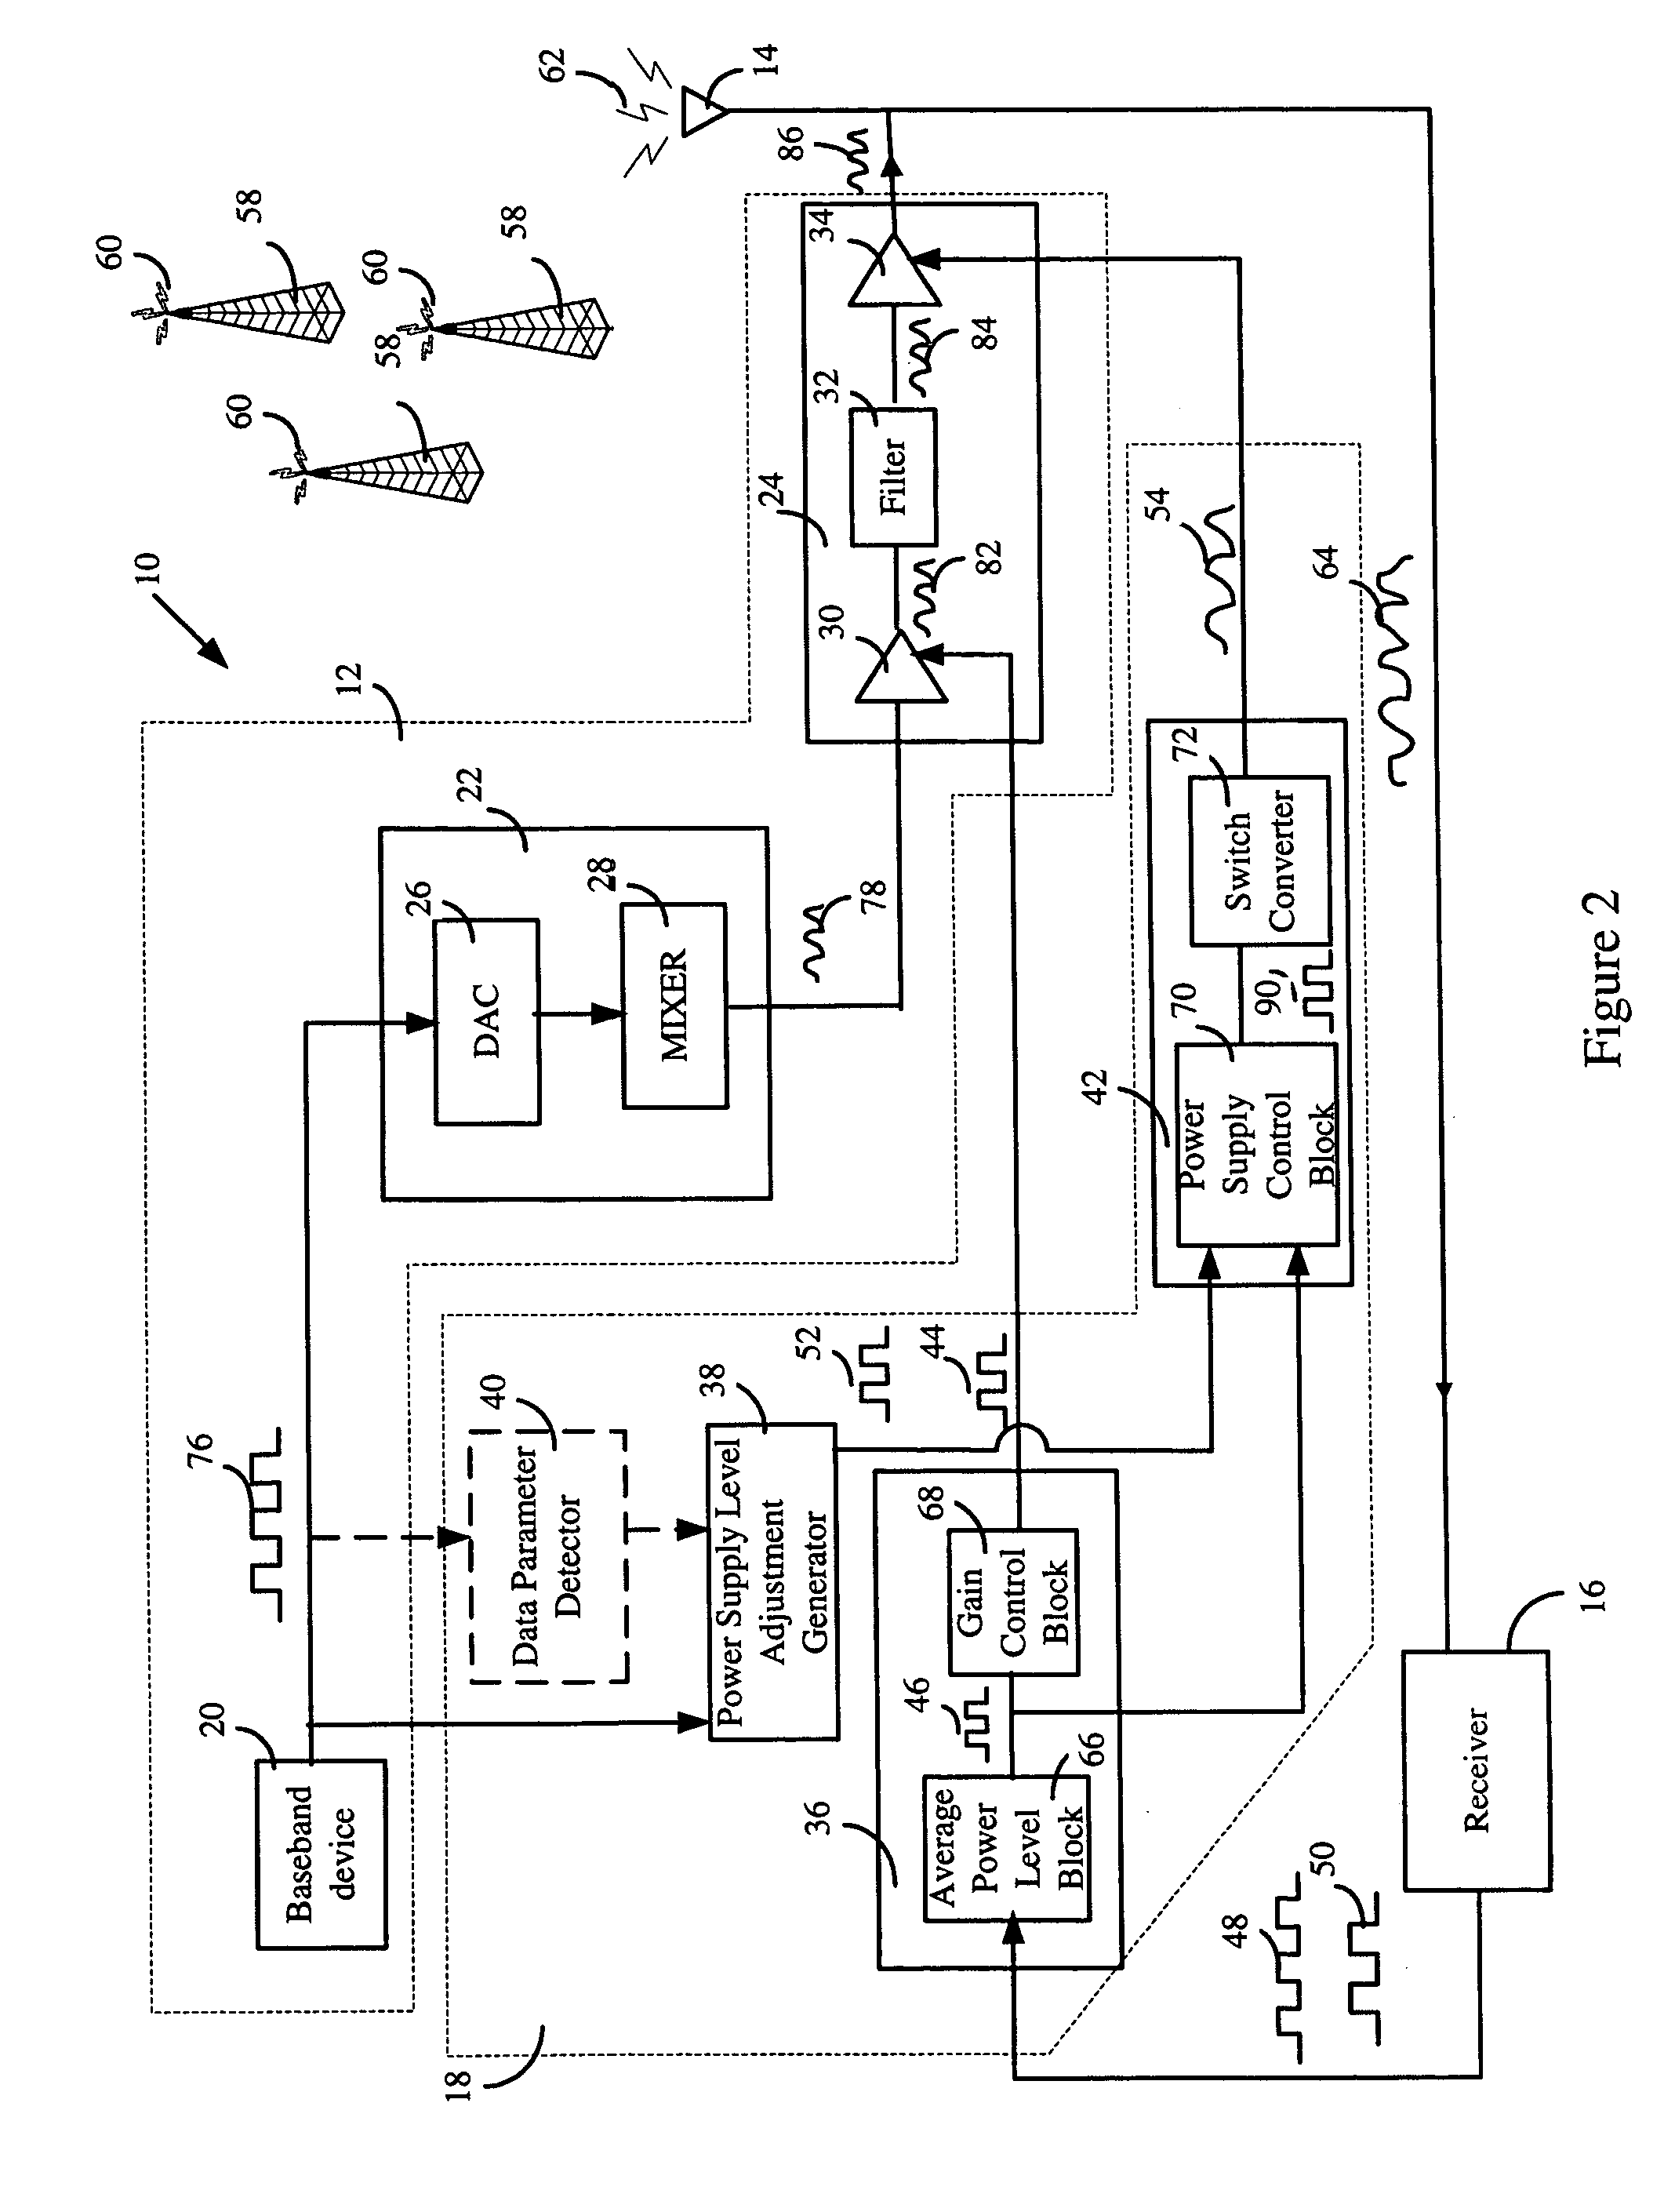 Method and apparatus for improving power amplifier efficiency in wireless communication systems having high peak to average power ratios